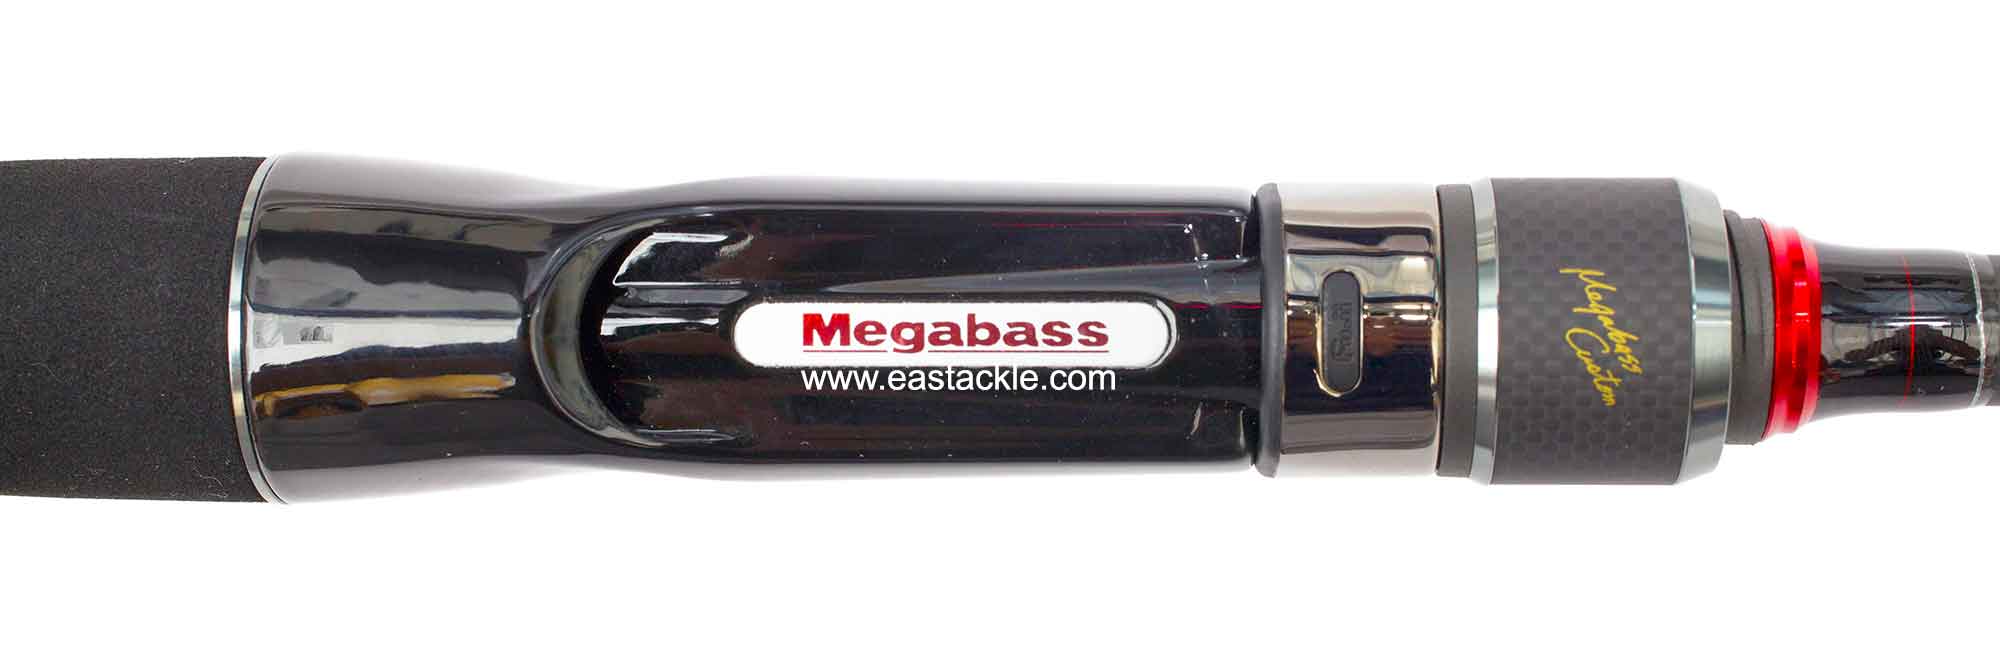 Megabass - Racing Condition World Edition - RCC-702MH - Bait Casting Rod - Reel Seat (Top View)